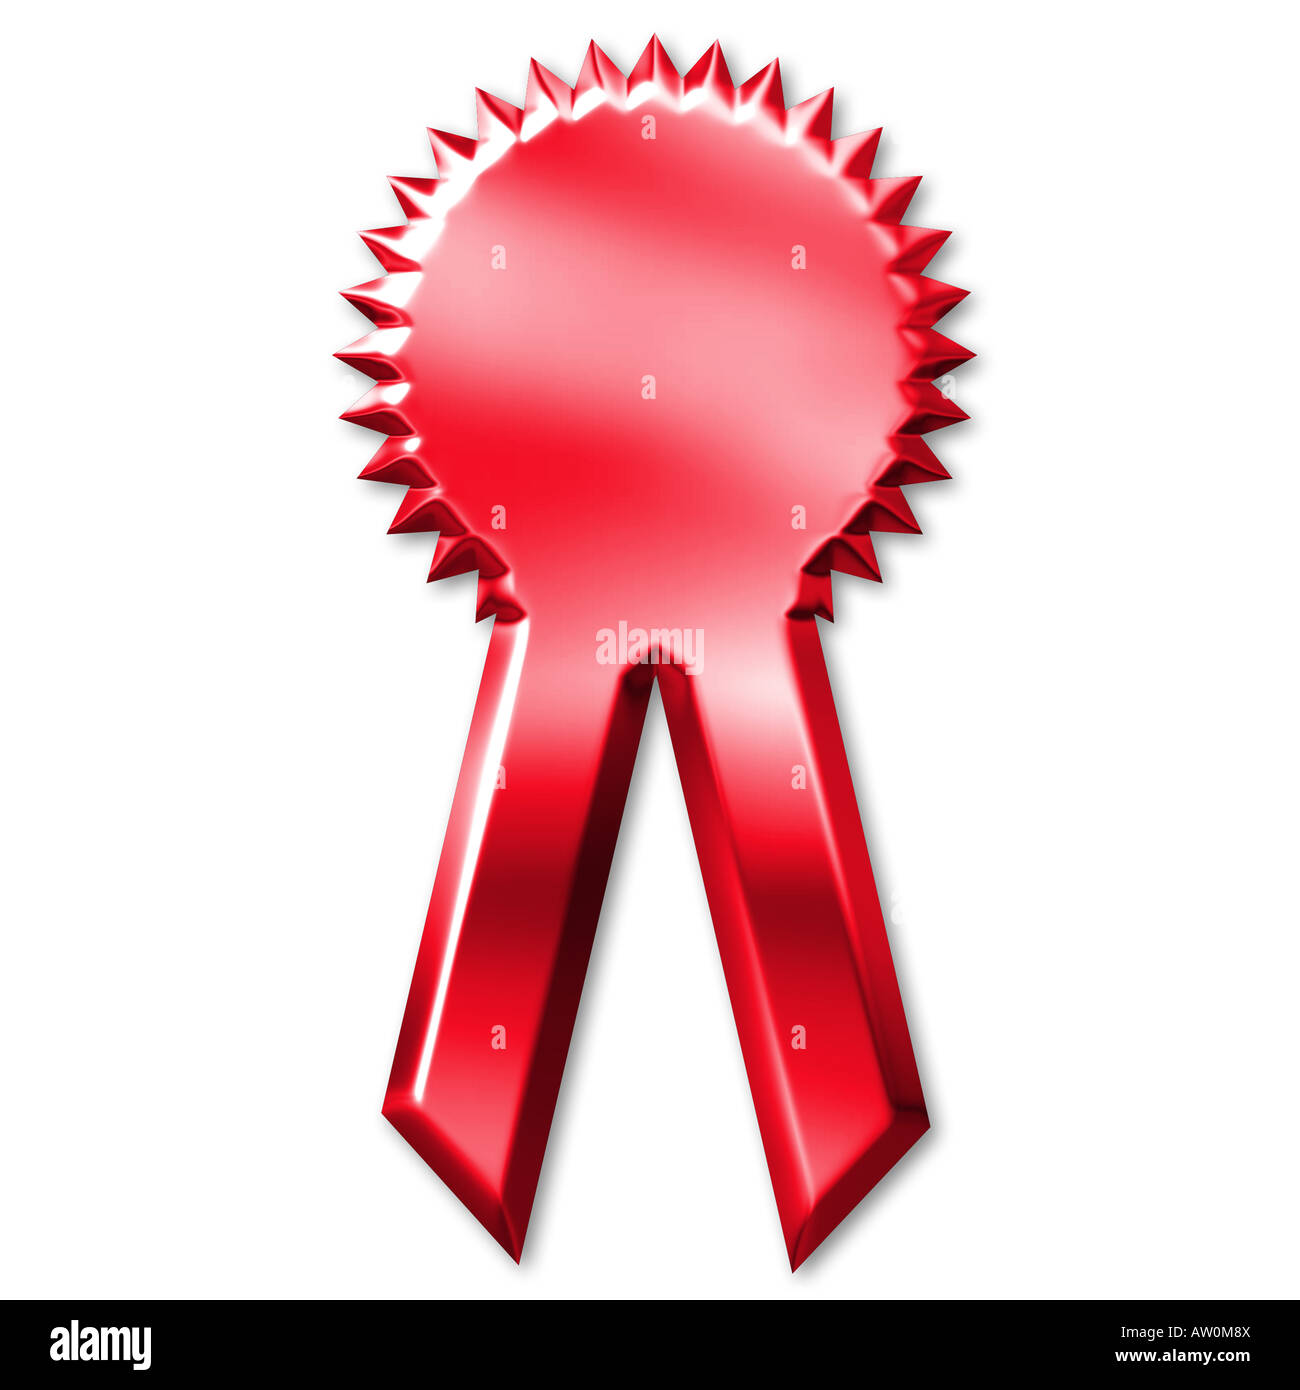 182,098 Prize Ribbon Images, Stock Photos, 3D objects, & Vectors